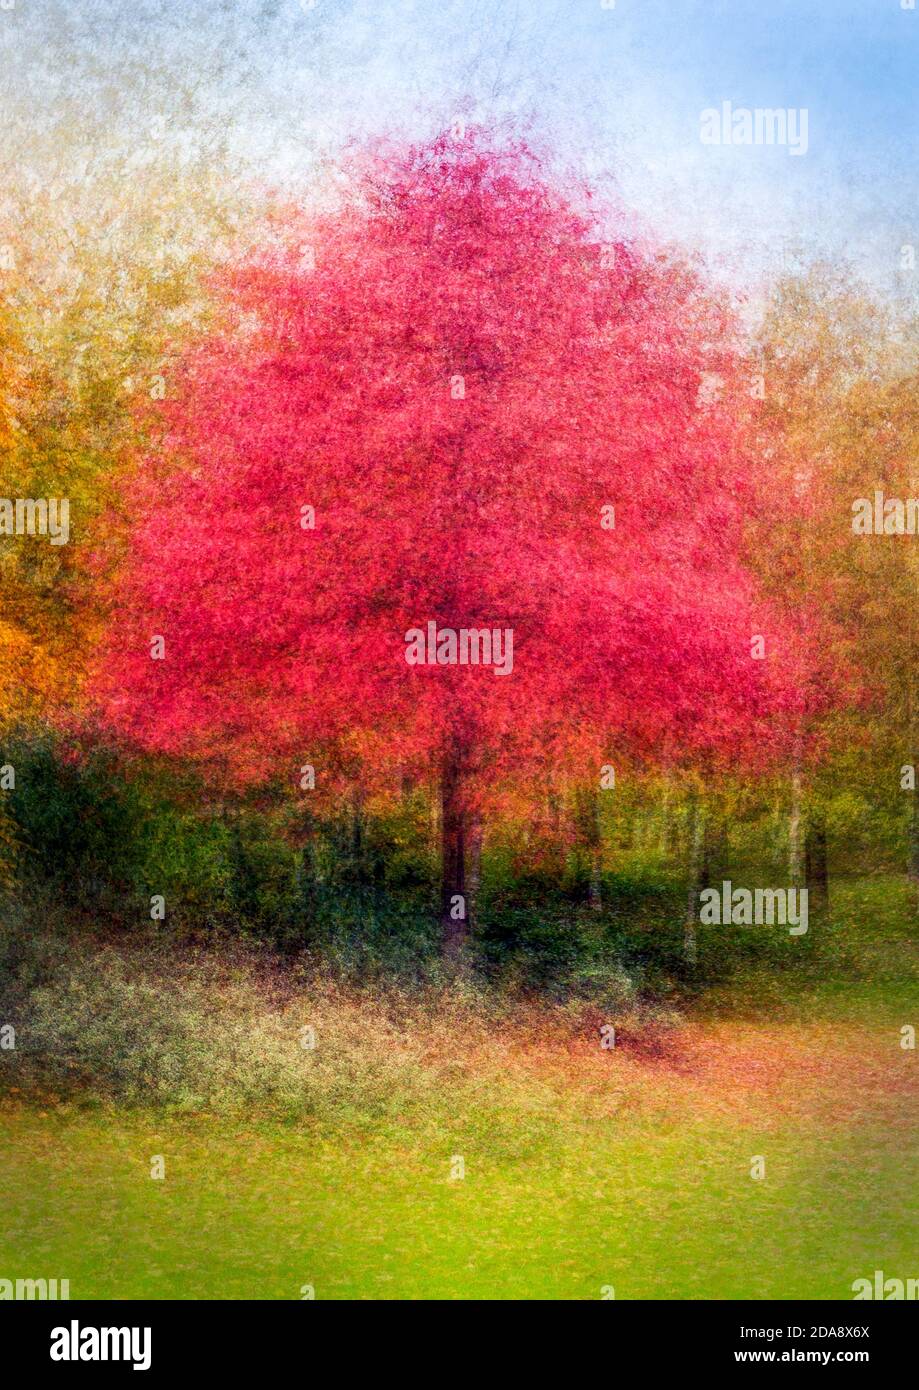 Maple tree in autumnal foliage shot in an artistic, impressionist way Stock Photo